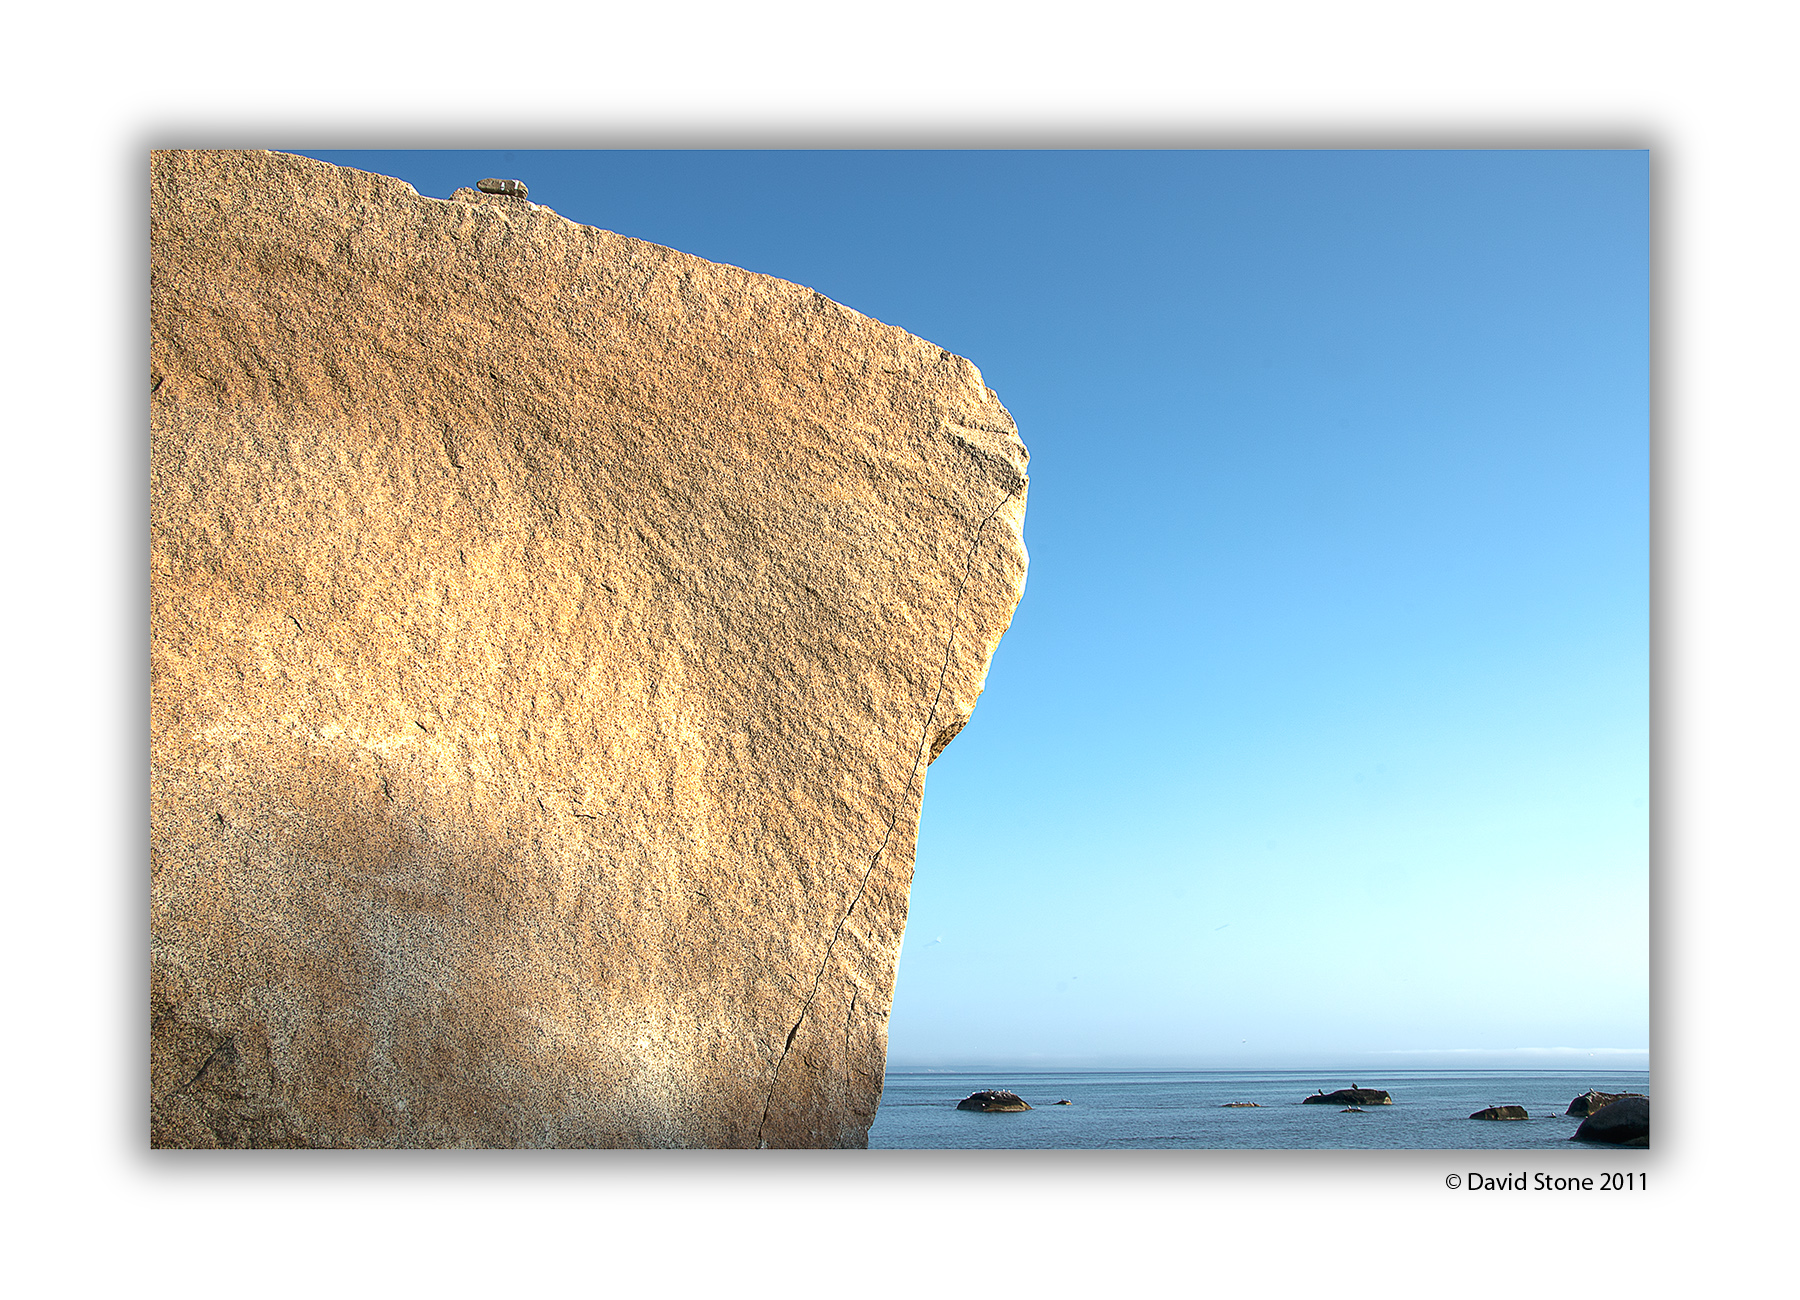 Big Rock On Vineyard Sound (user submitted)